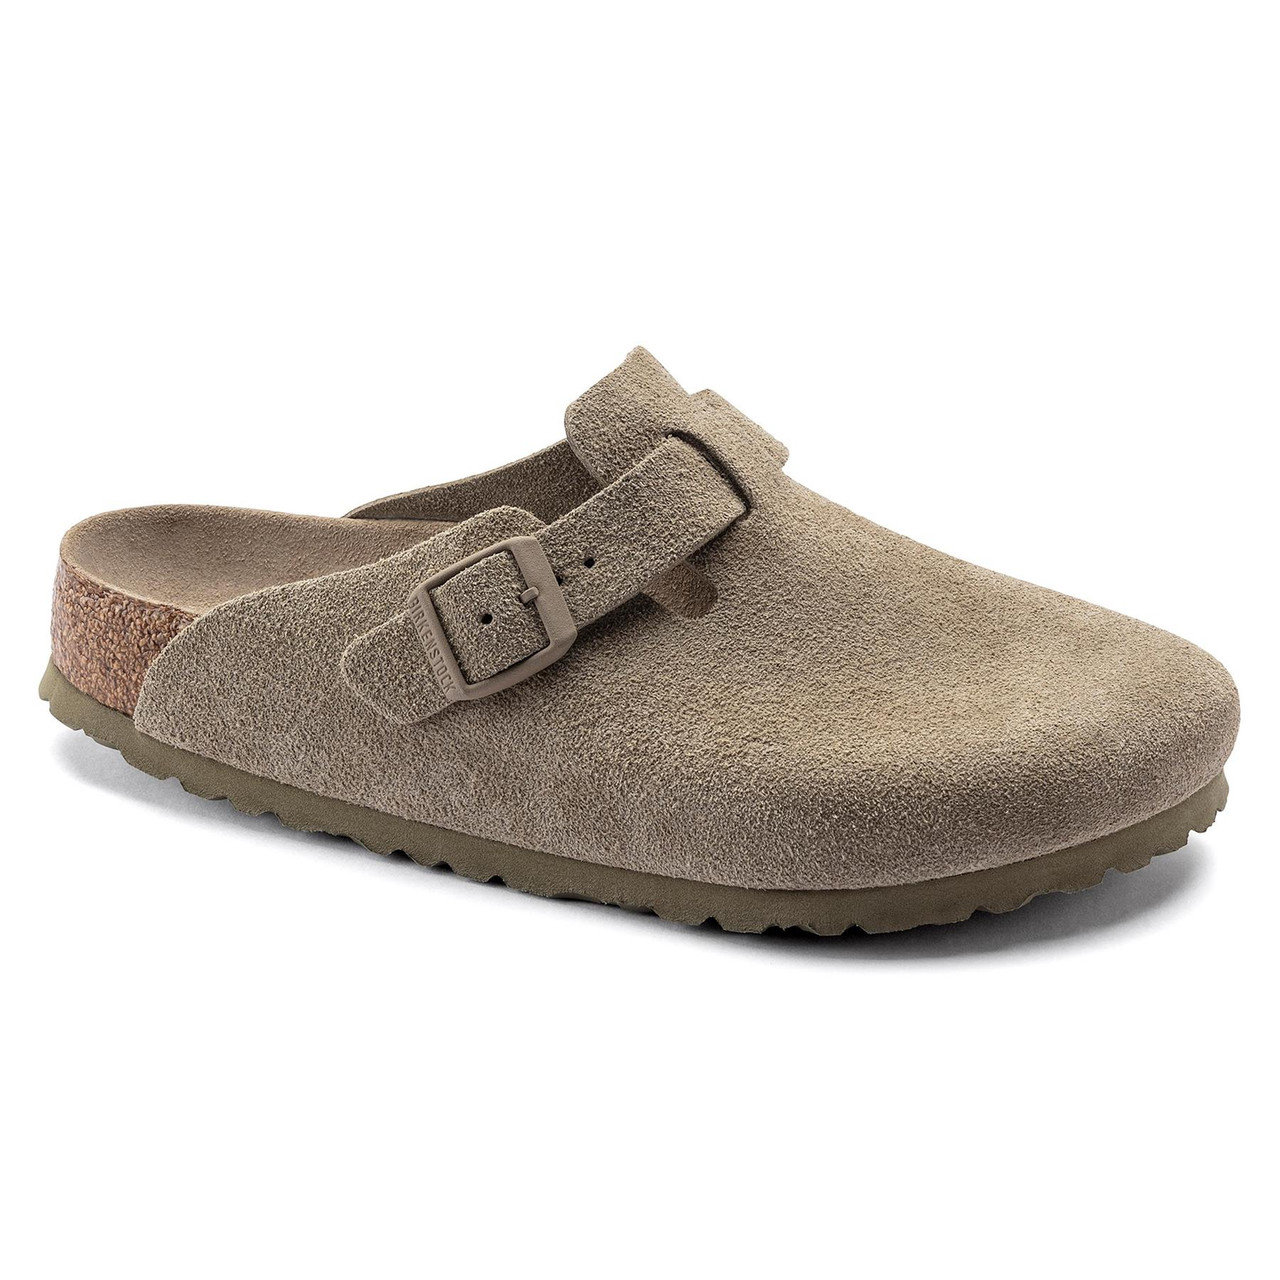 In which country are the Birkenstock Boston Soft Footbed Suede Leather Clogs produced?